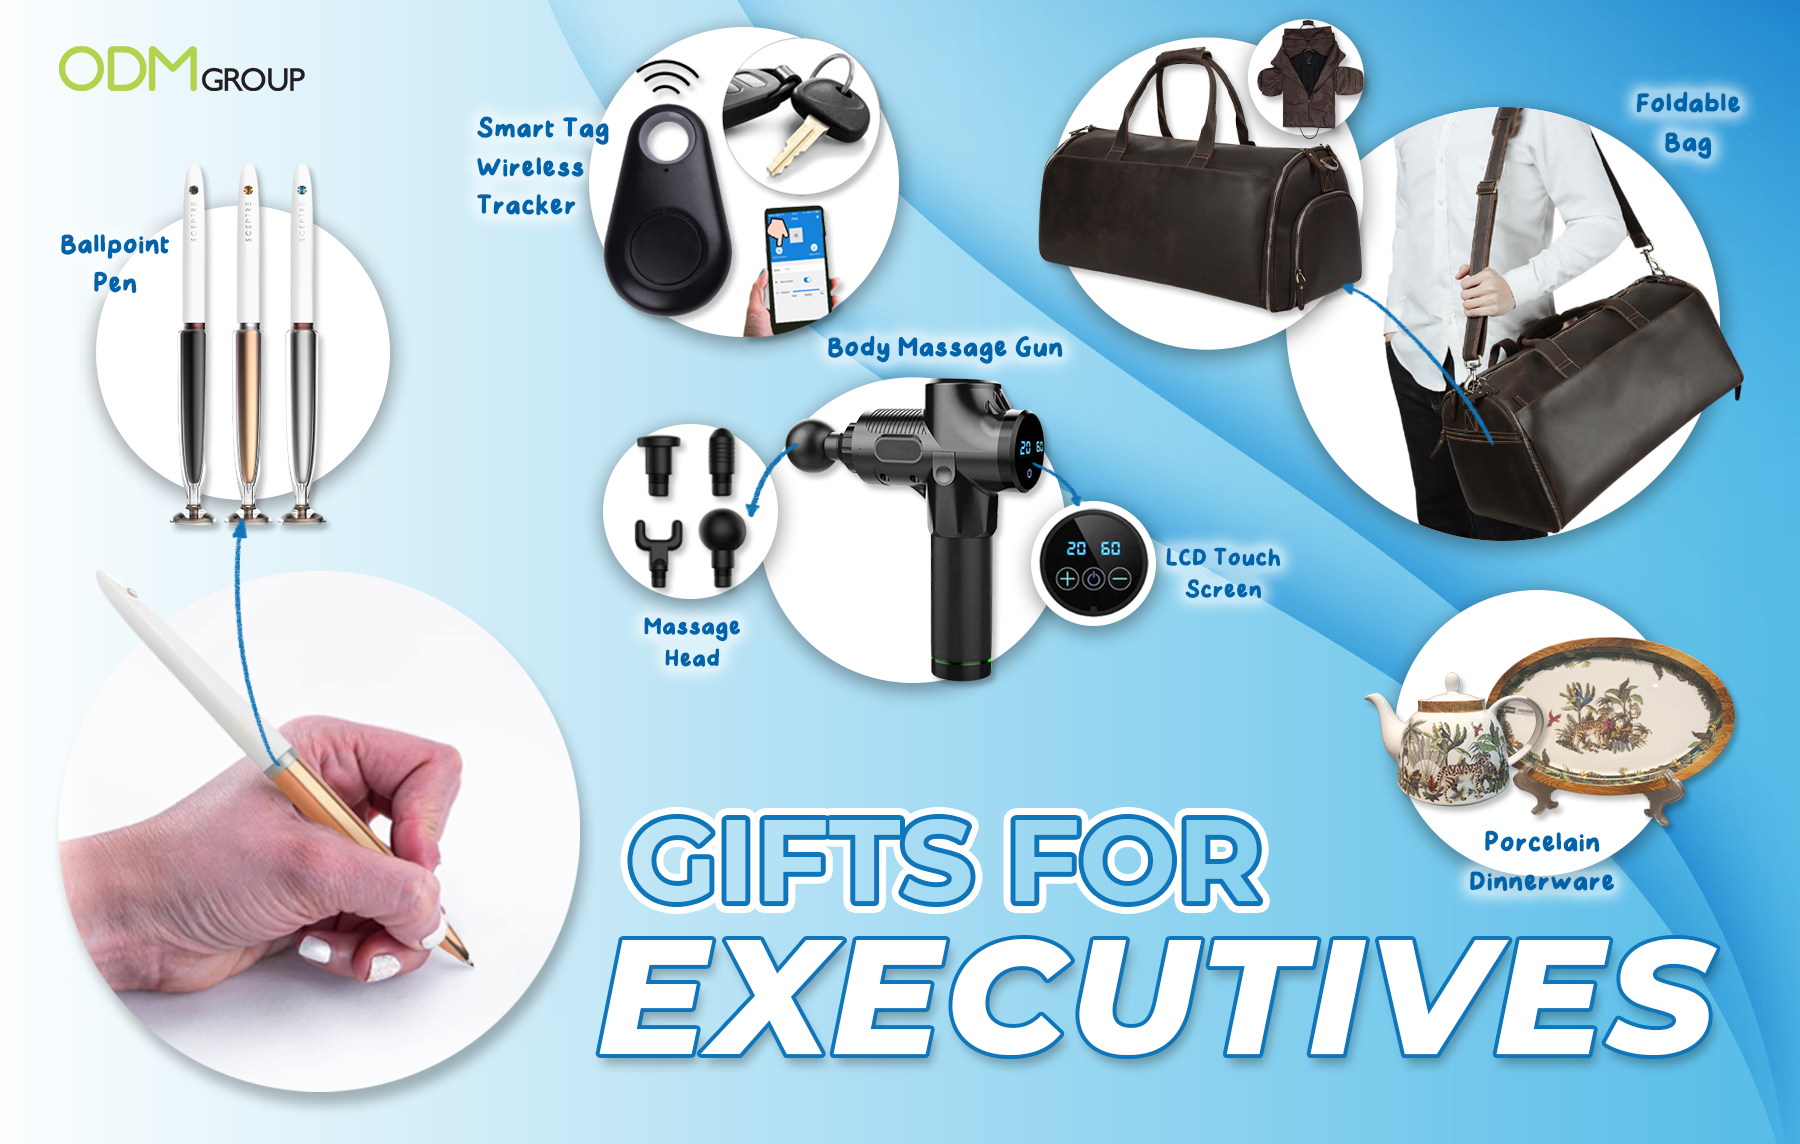 Corporate Gift Ideas- Gifts for Executives